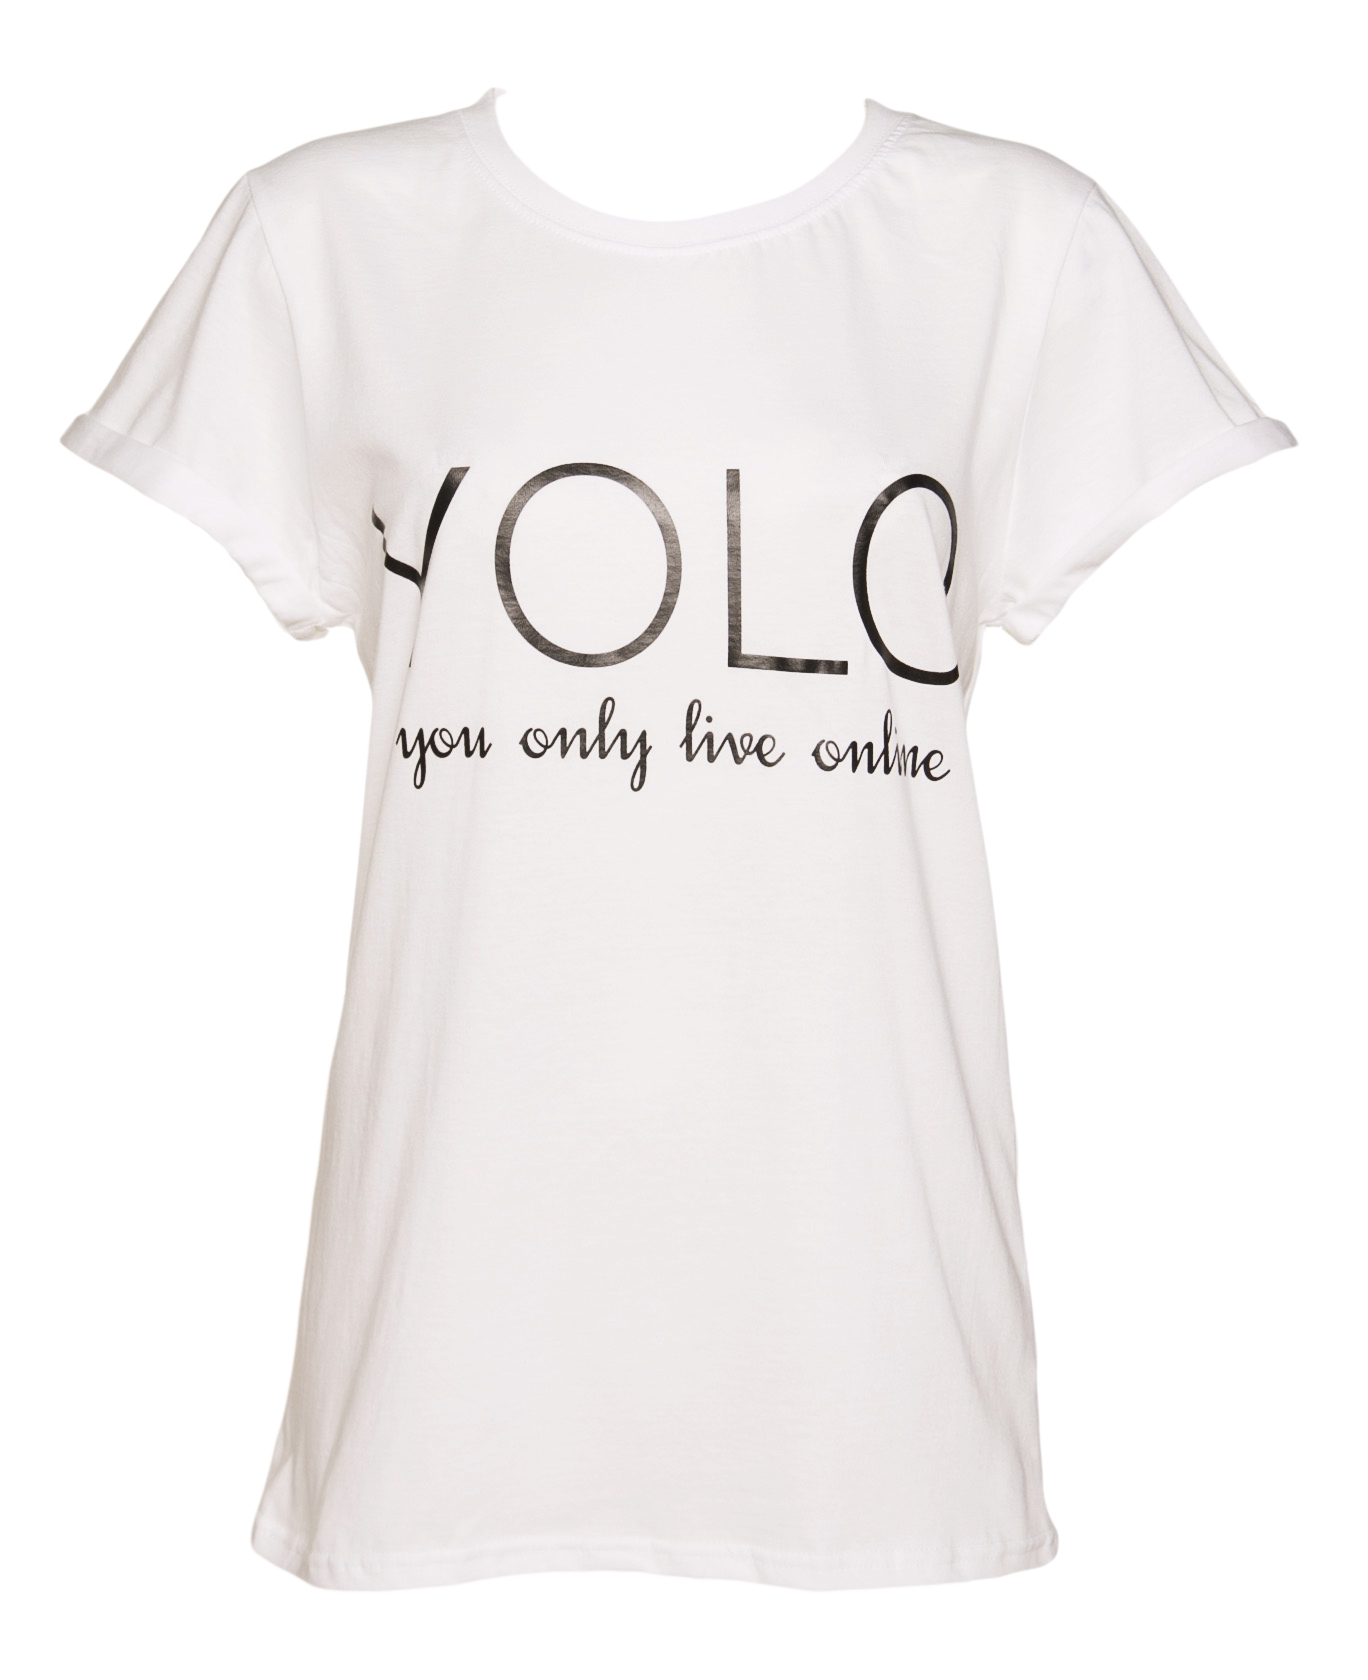 Ladies YOLO You Only Live Online T-Shirt